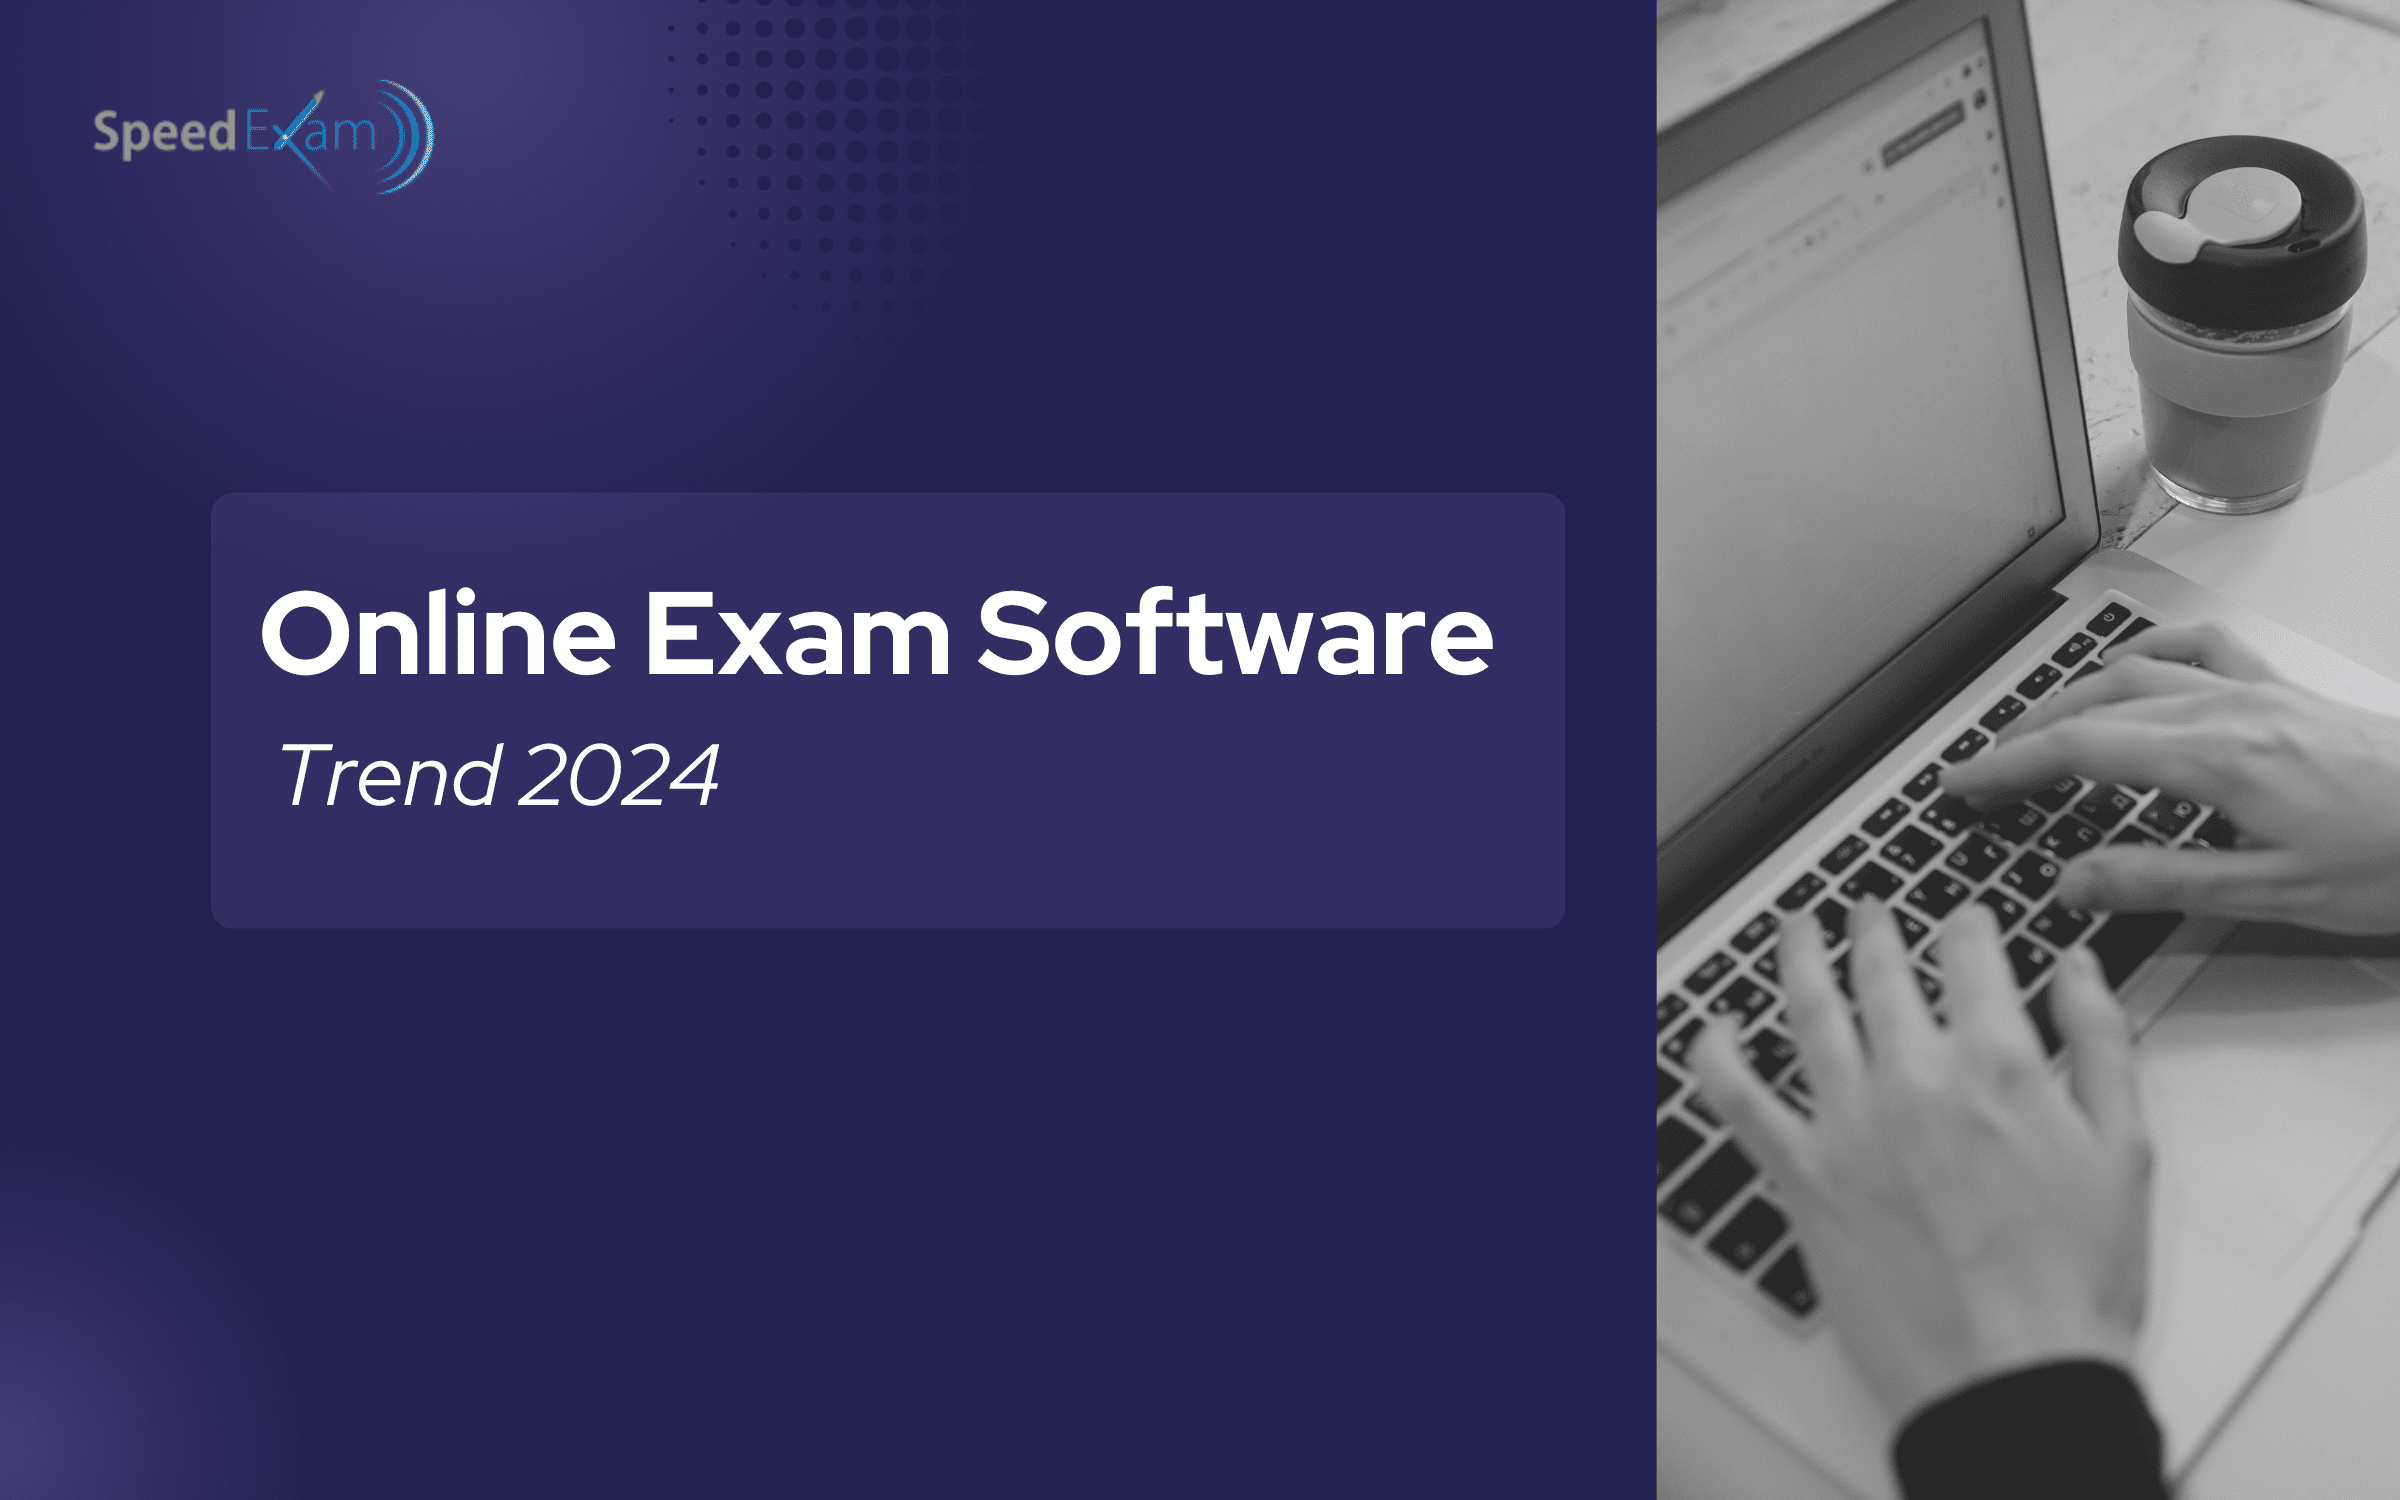 The Future of Online Exam Software Trends and Predictions